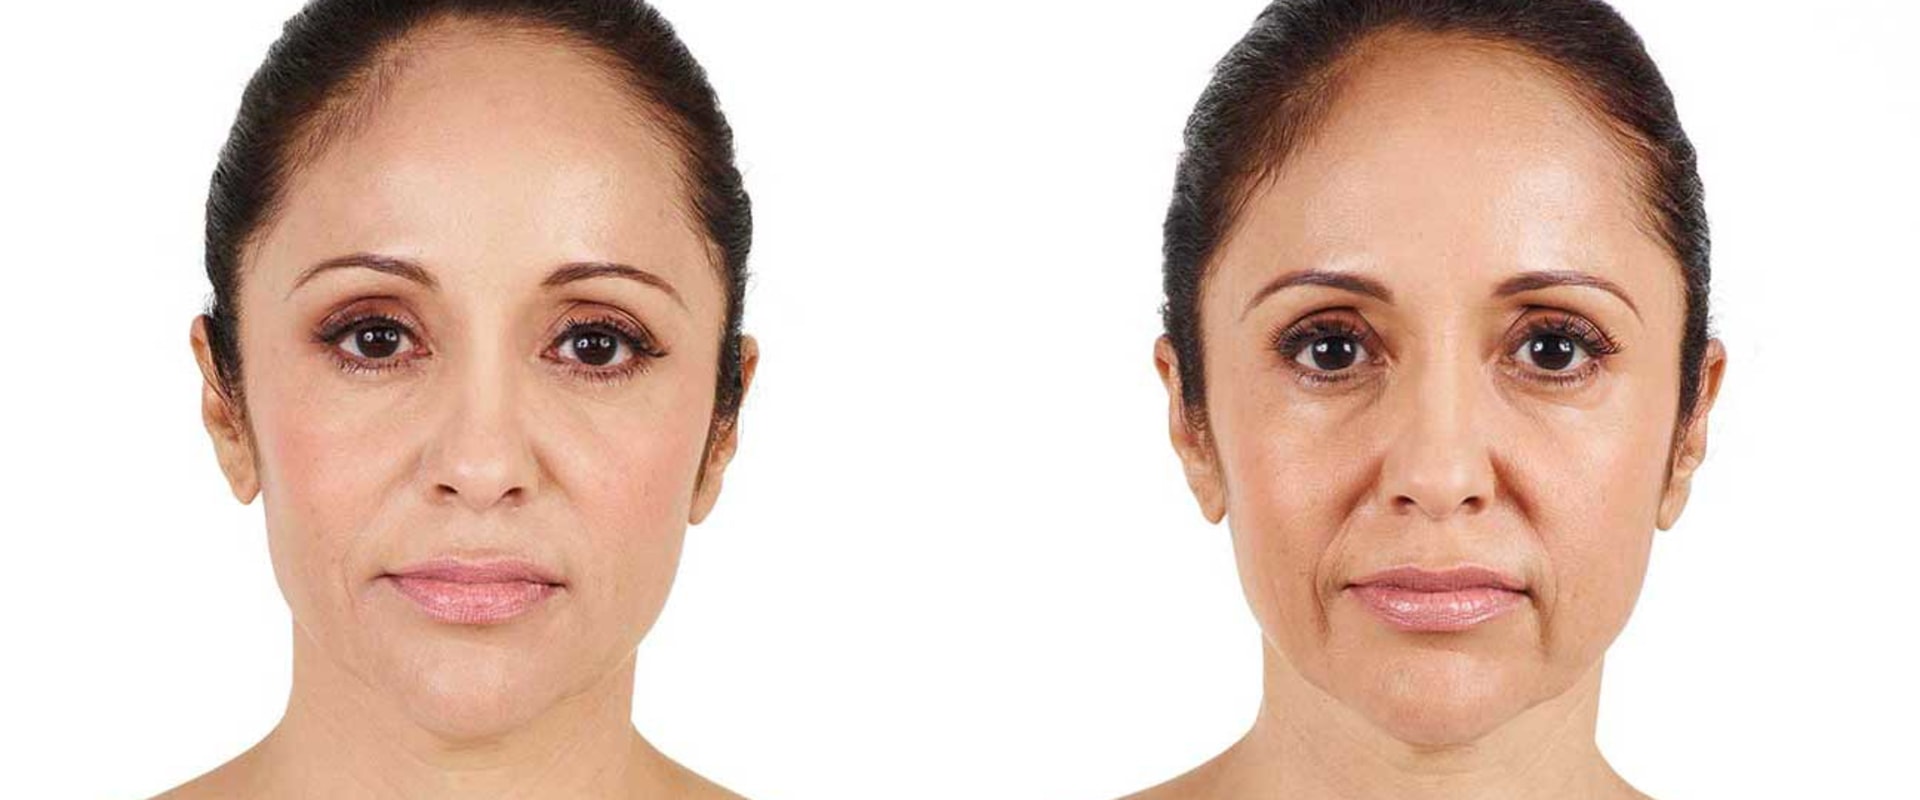 Can you use juvederm on your face?